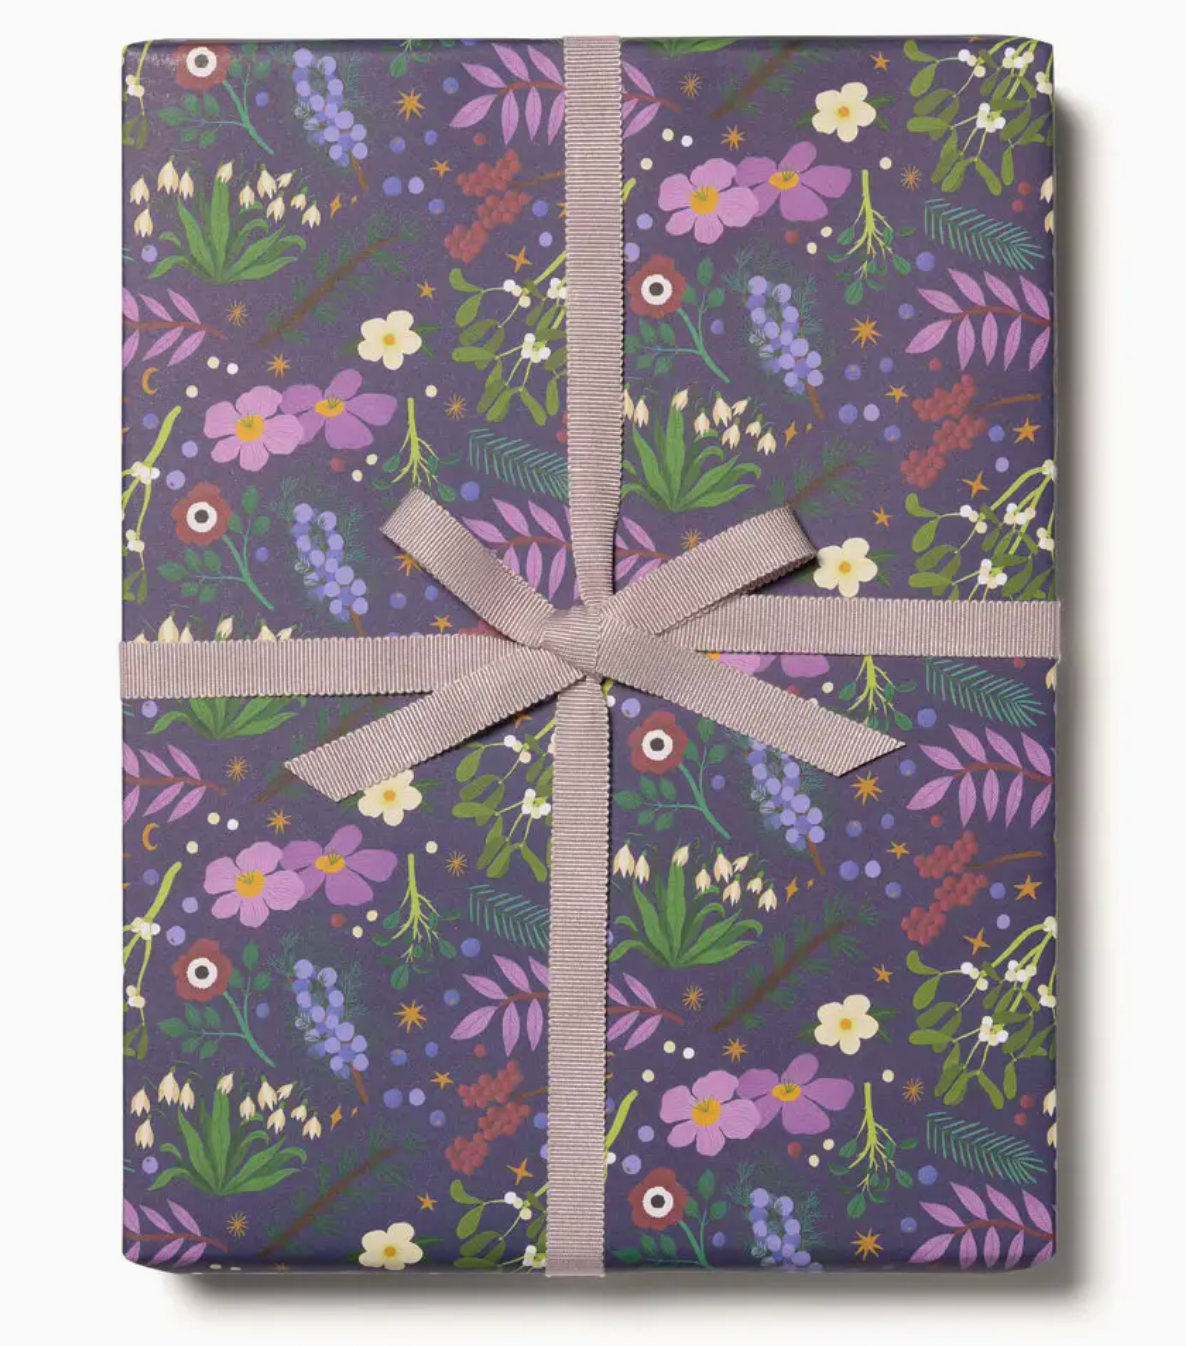 Winter Botanicals Holiday Wrapping Paper